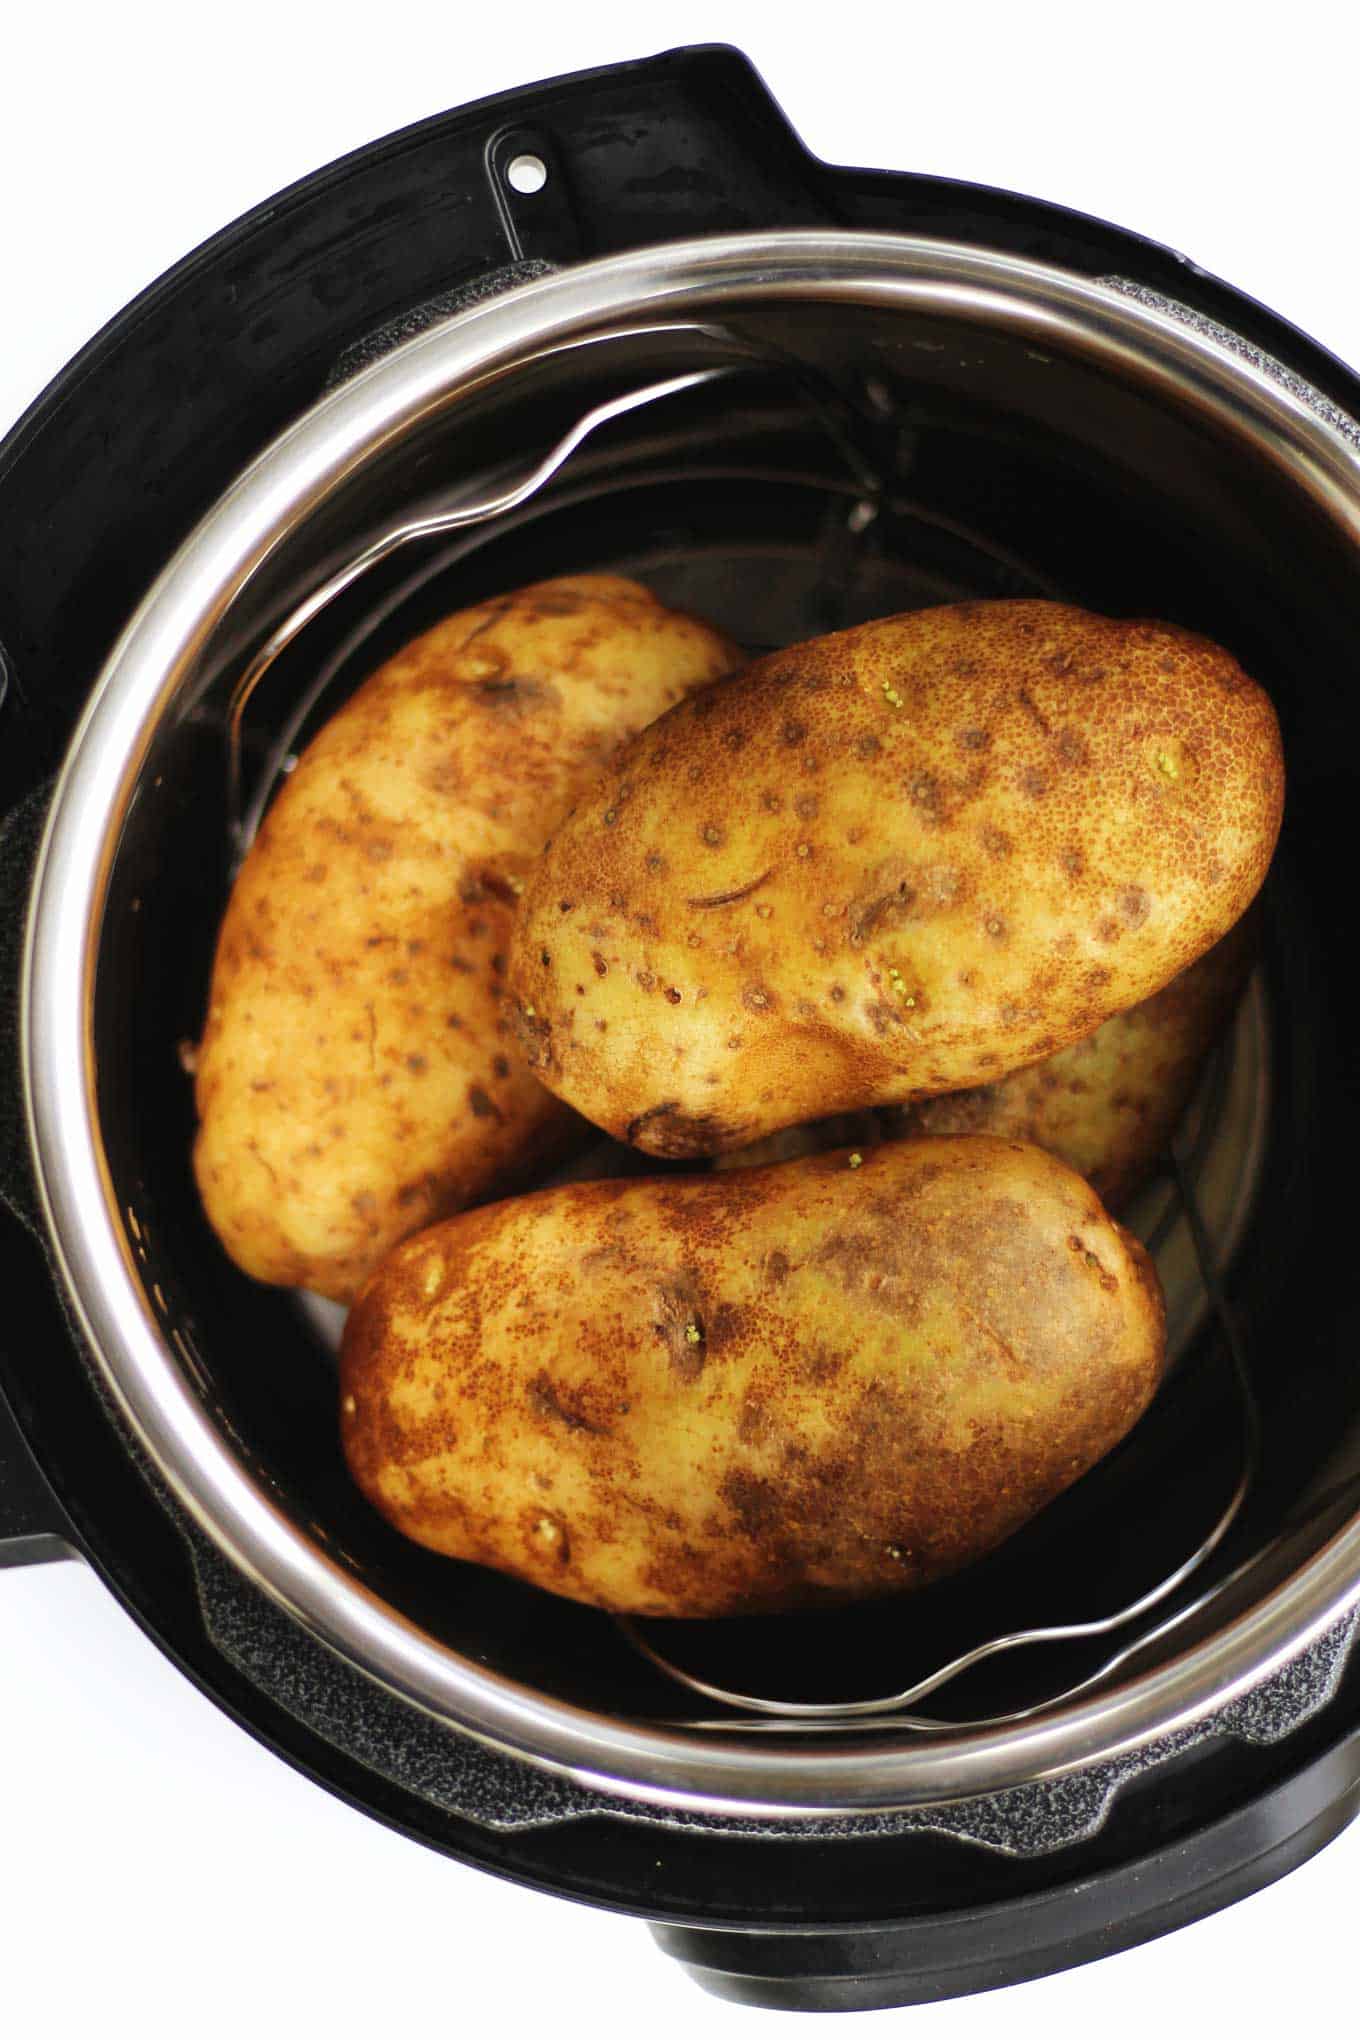 A picture of russet potatoes in an Instant Pot